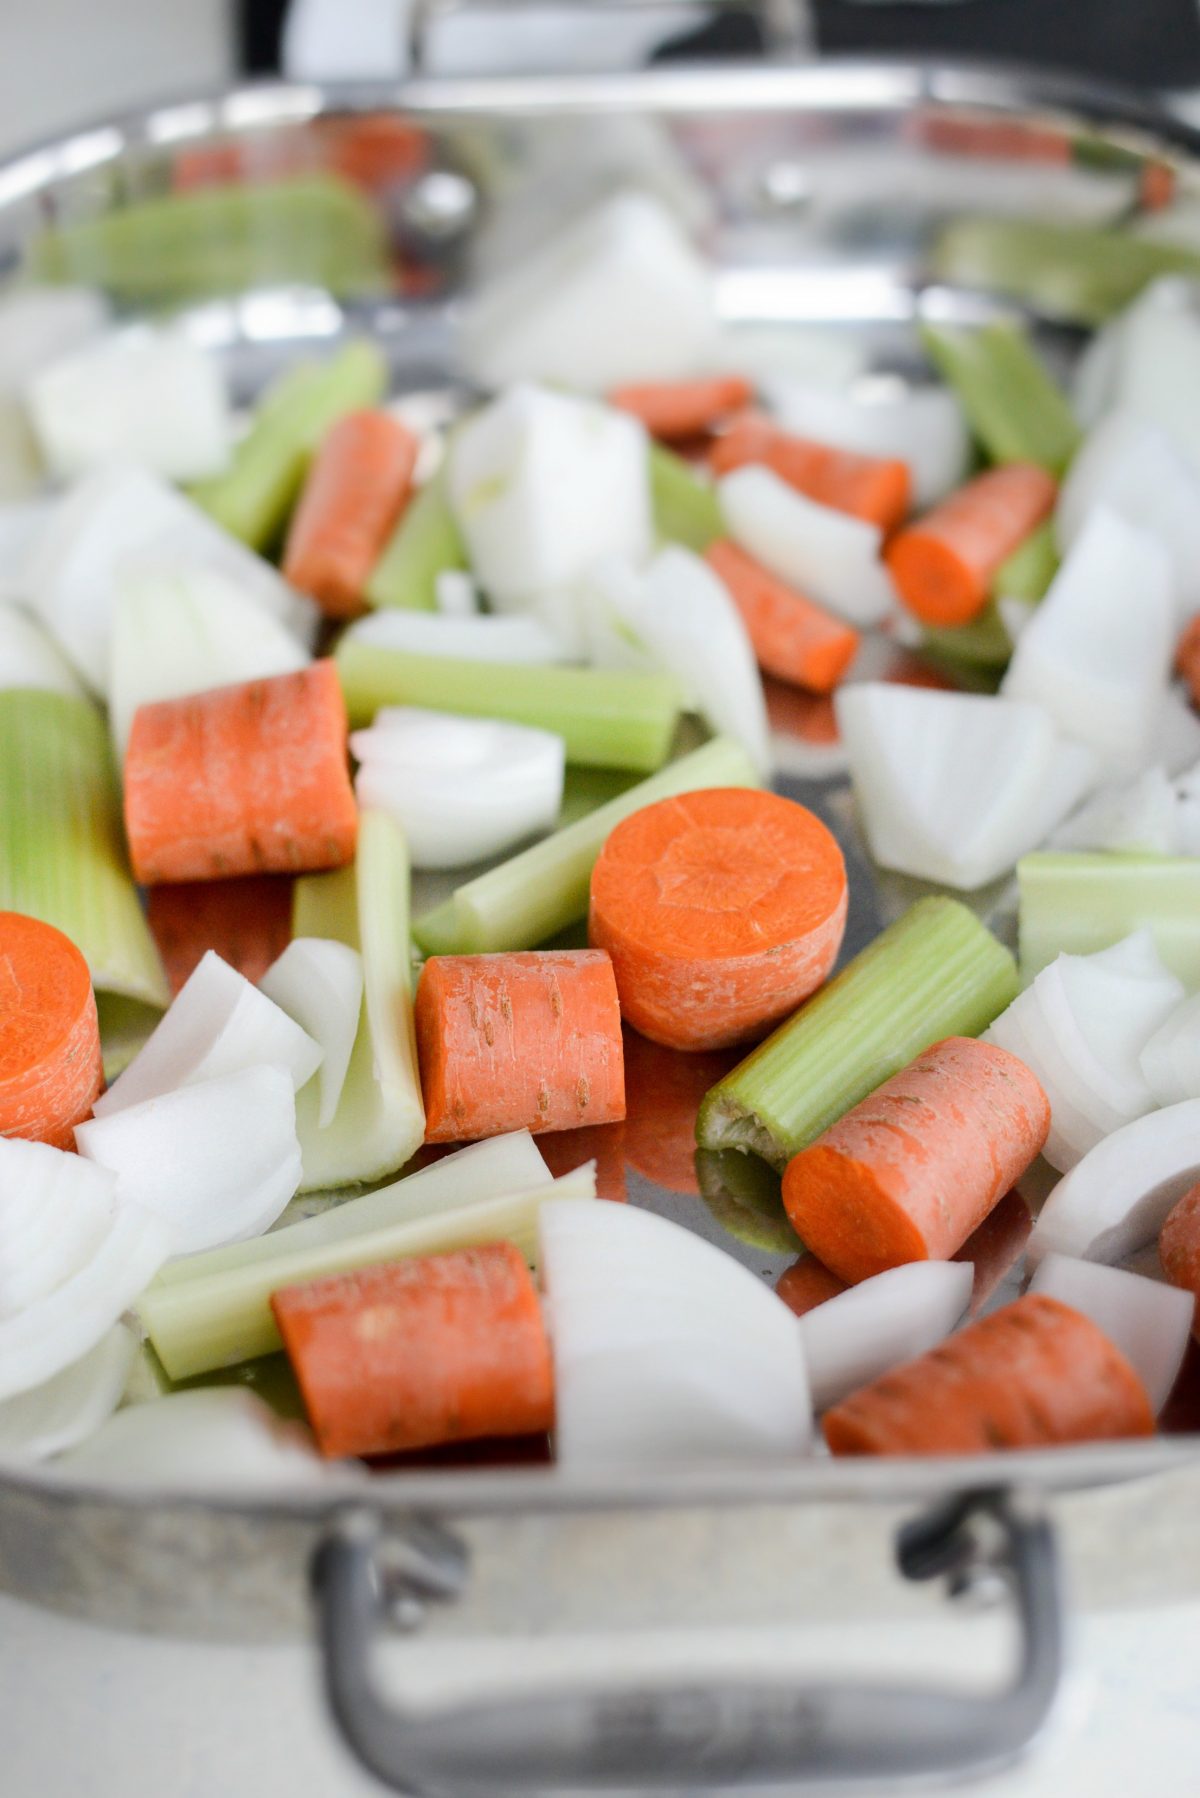 chopped vegetables in a roasting pan